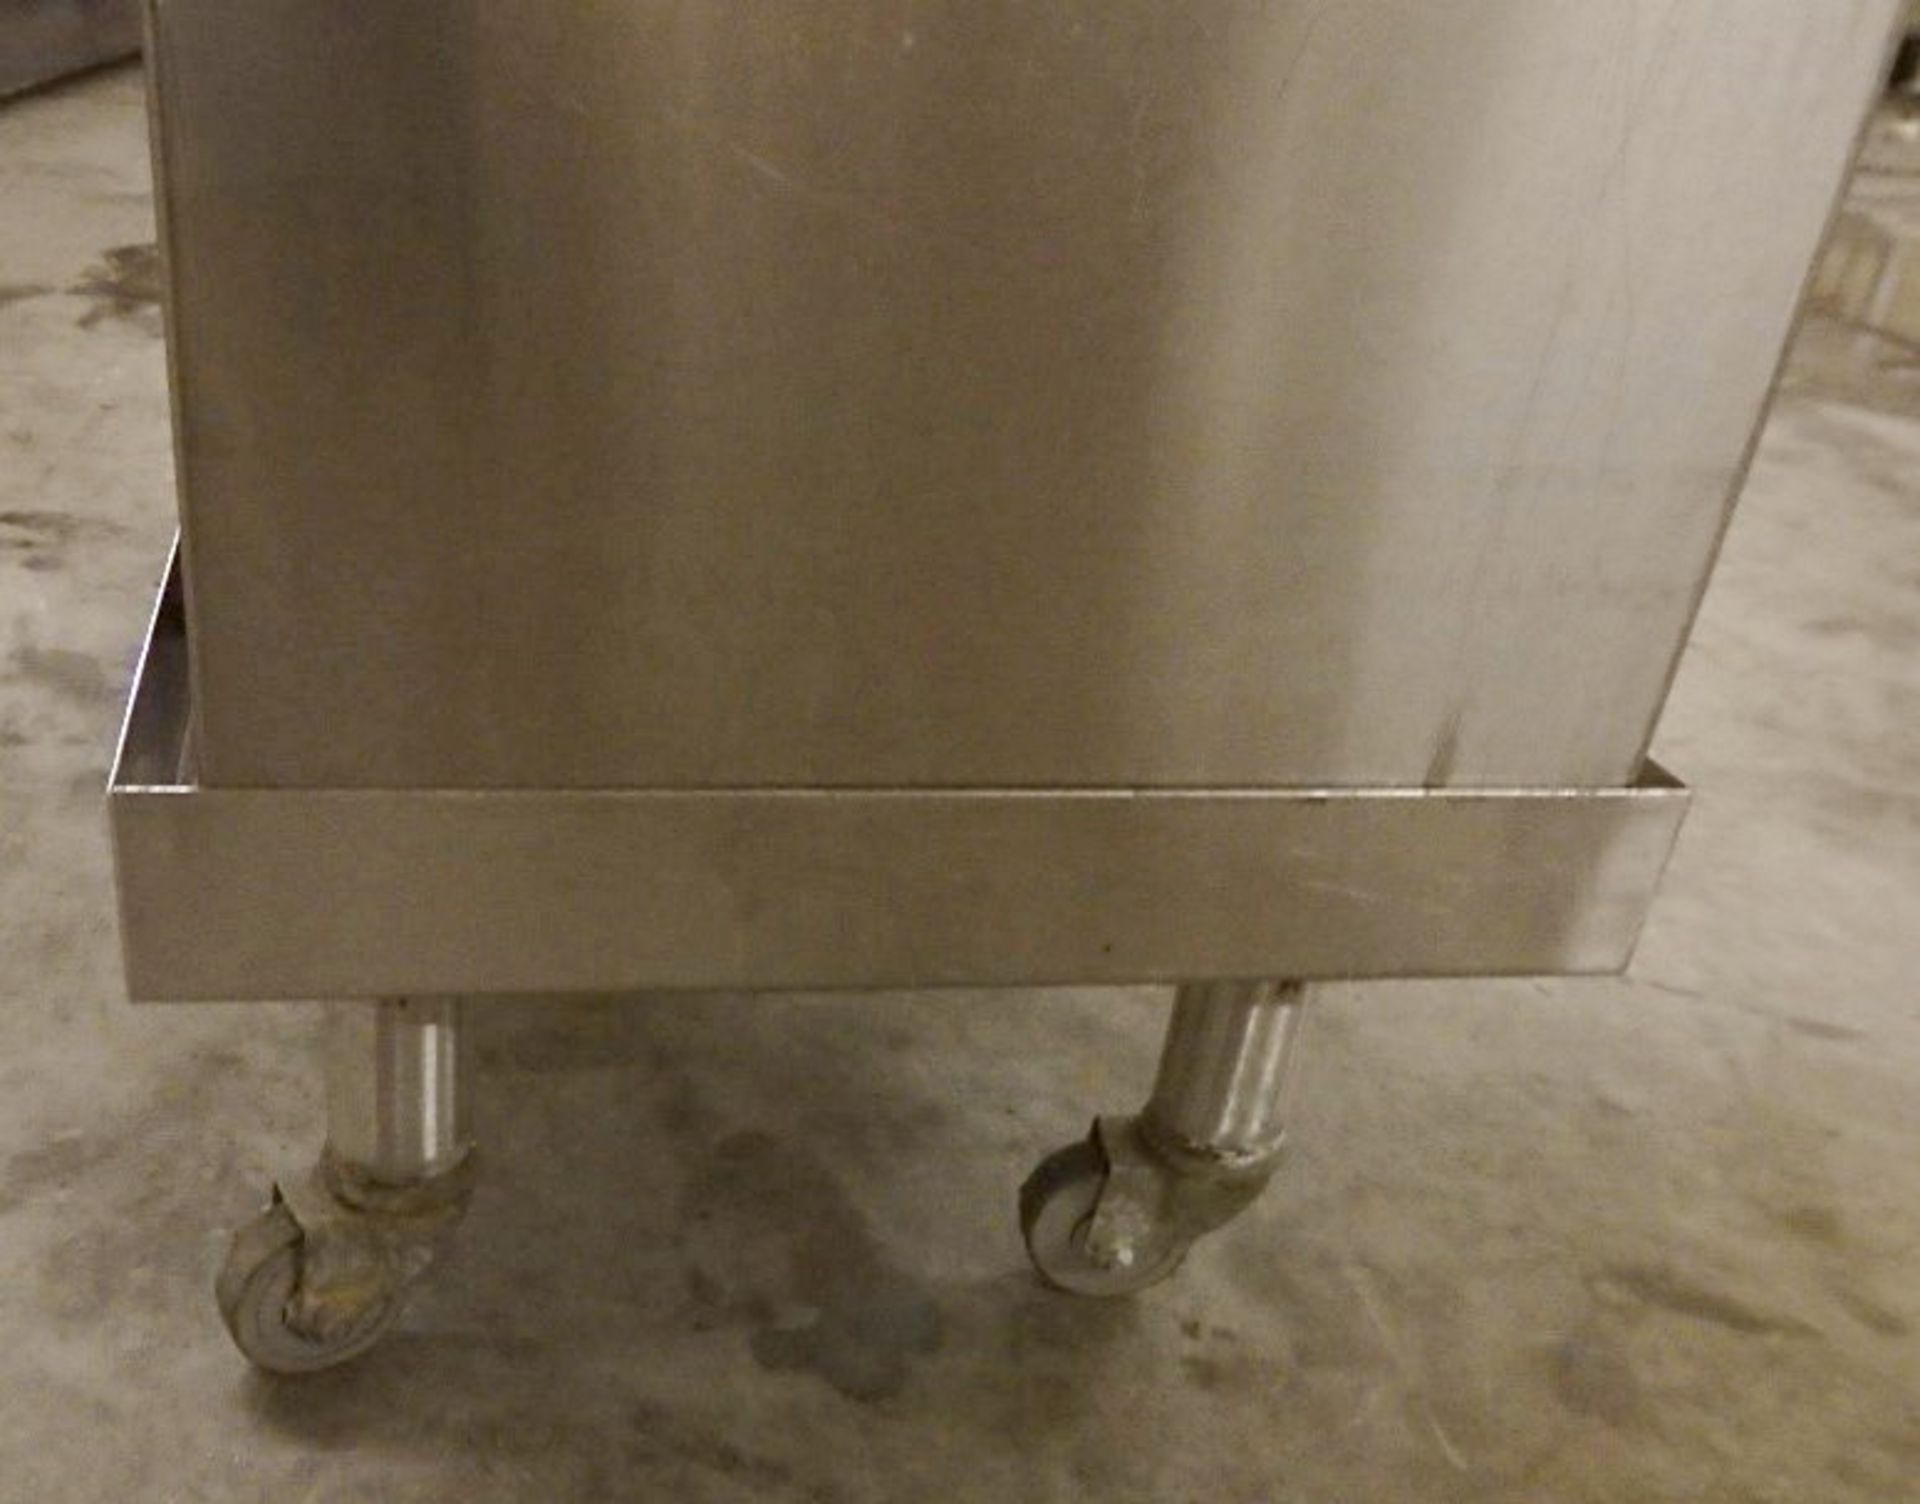 1 x Stainless Steel Under The Counter Storage Container On Weeled Base - Lifts Out From Base For - Image 3 of 4